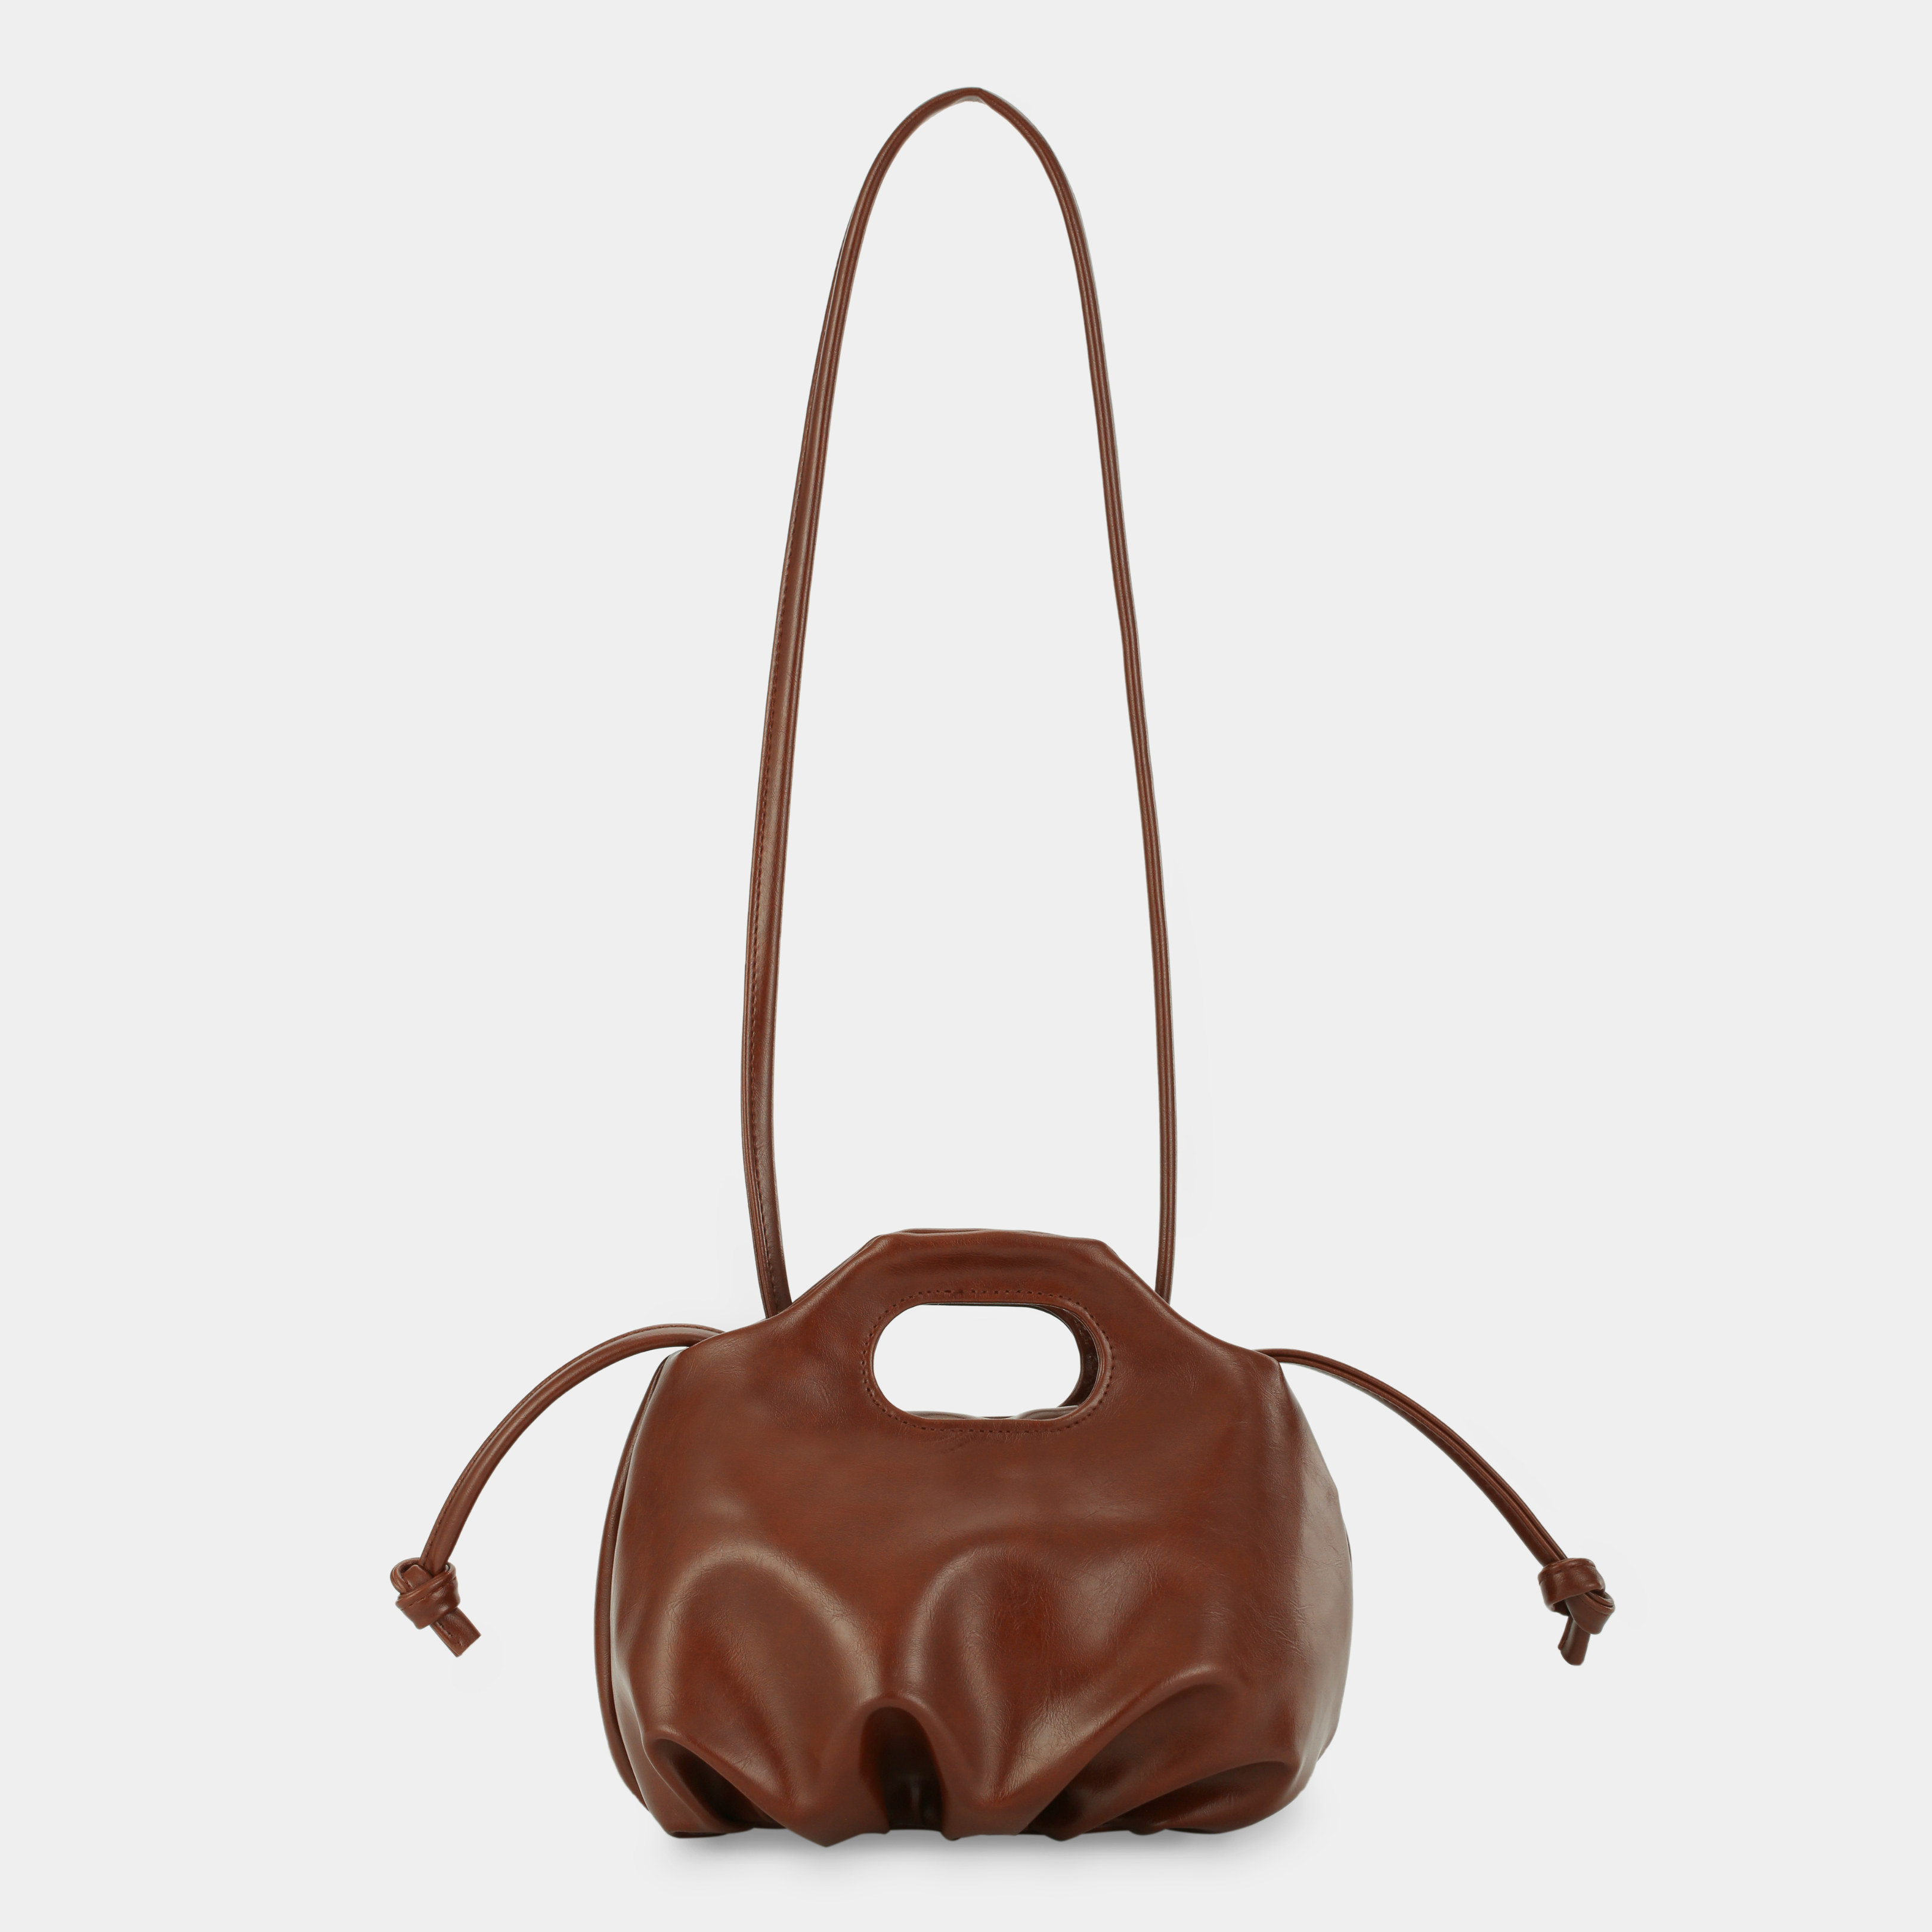 Flower Mini bag in glossy brown color